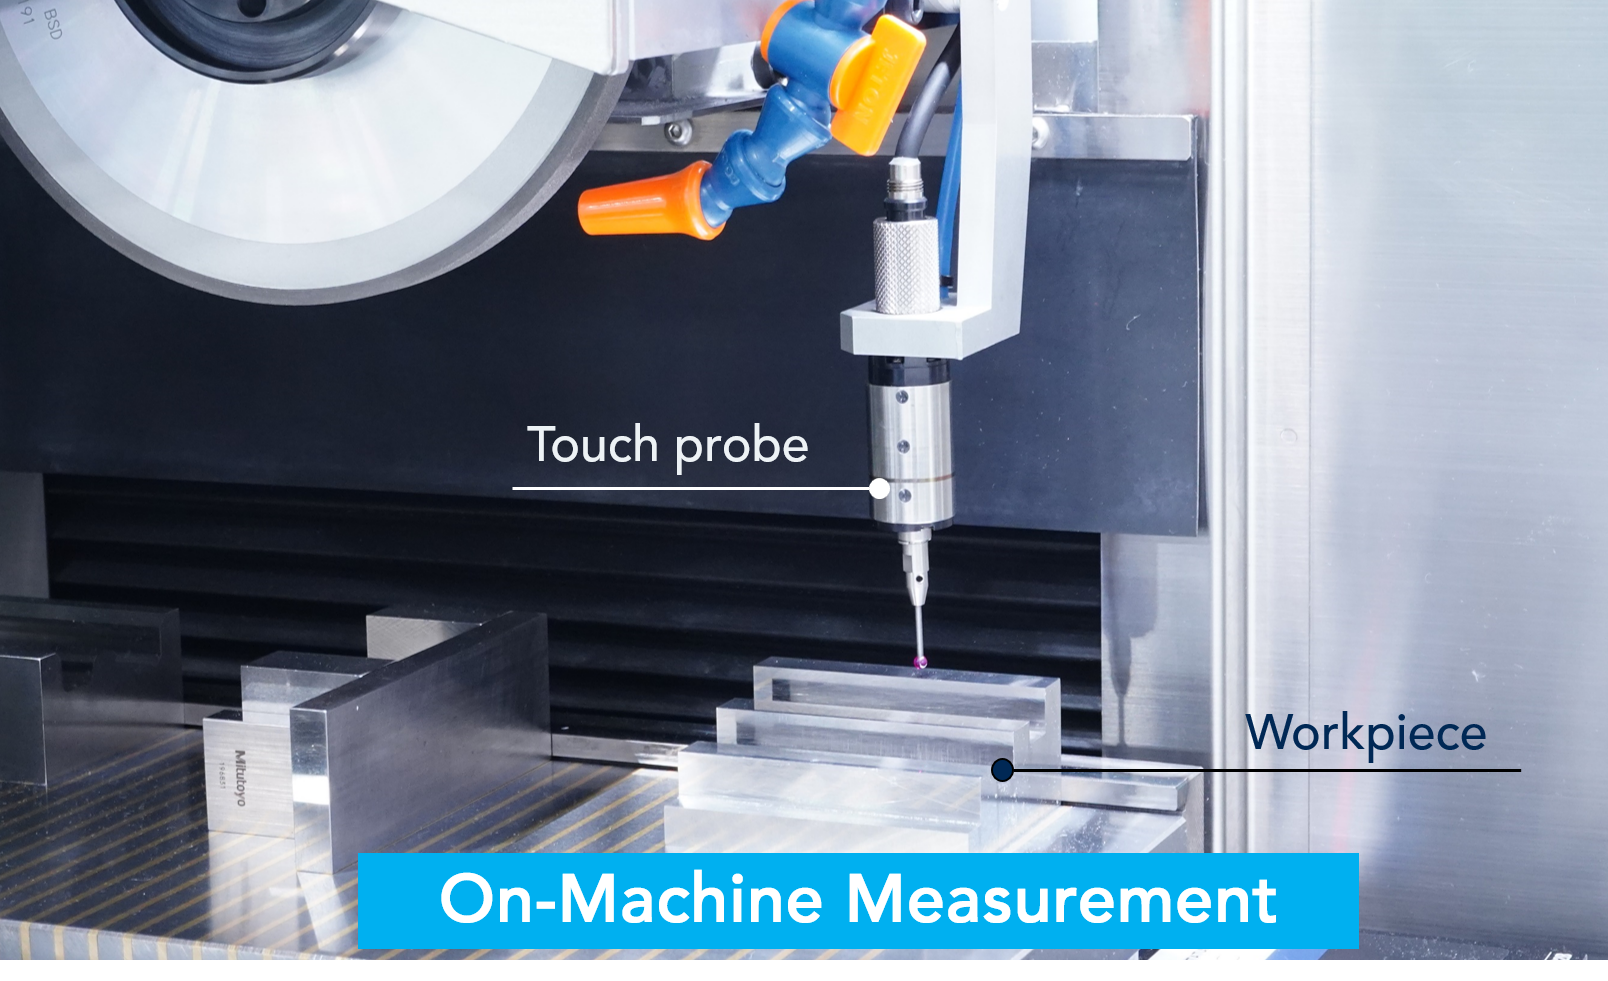 On-machine measurement using touch probe